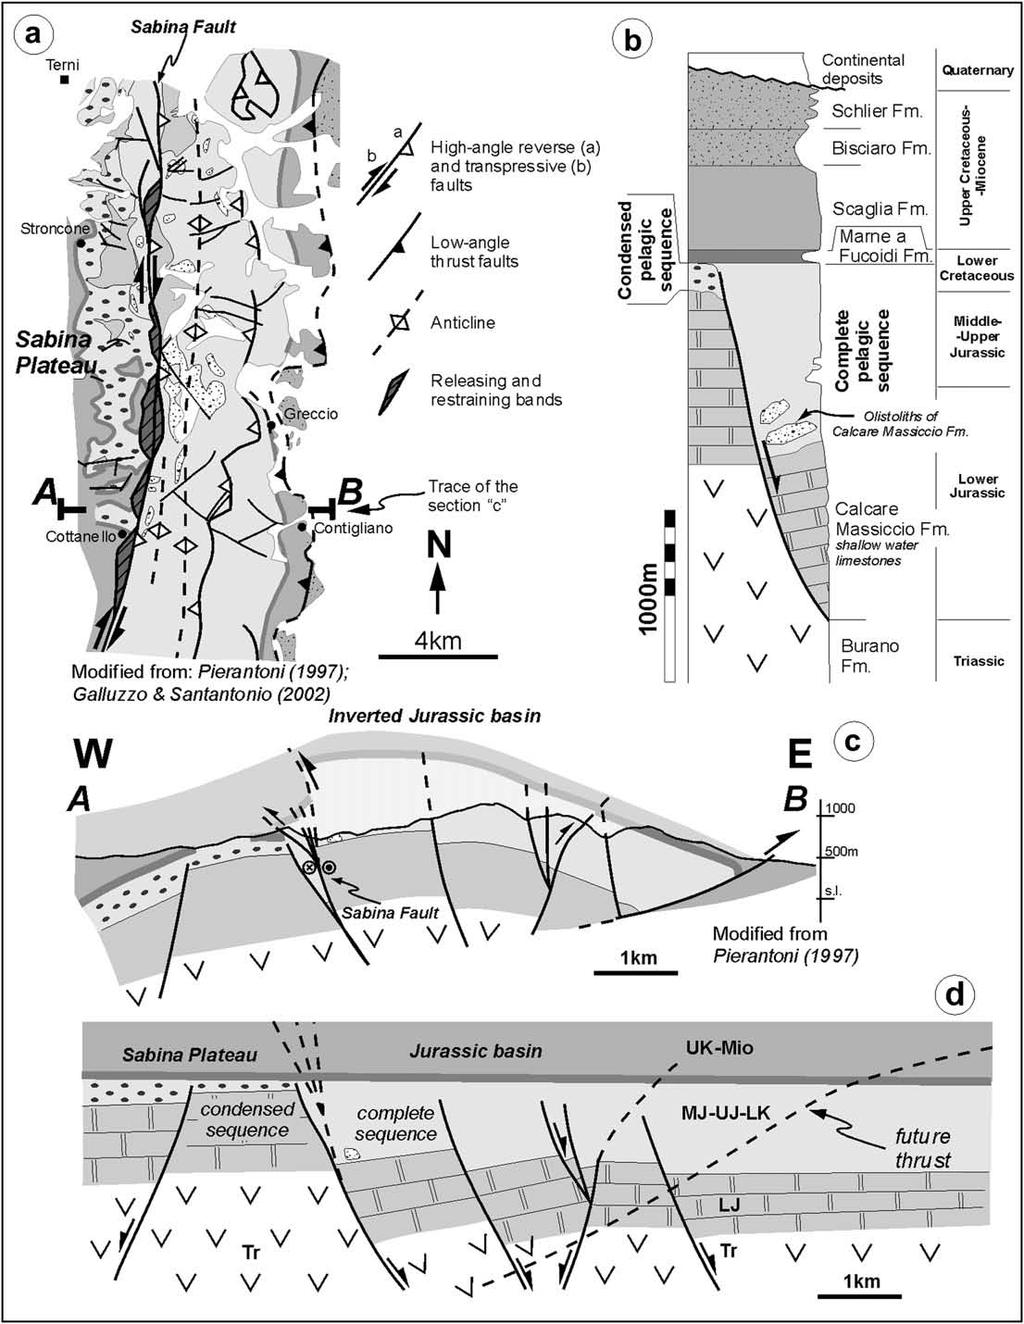 8 V. Scisciani / Journal of Structural Geology xxx (2009) 1 19 Fig. 7. Simplified structural and geological map (a) and stratigraphic column (b) of the Sabina area (see Fig. 2 for location).